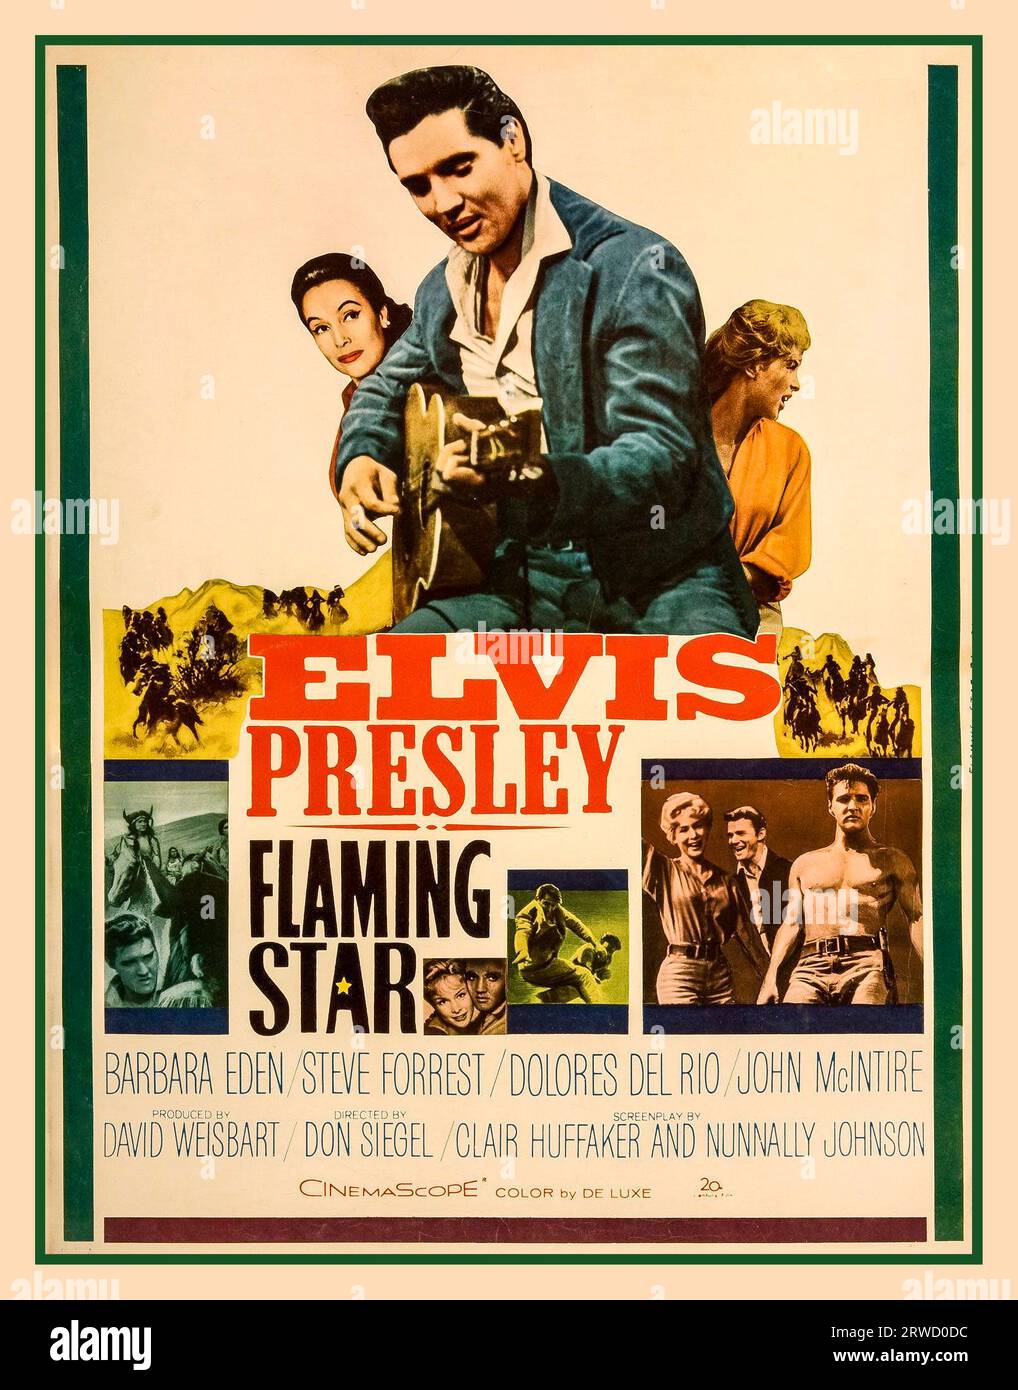 Flaming Star vintage film poster is a 1960 American Western film starring Elvis Presley, Barbara Eden, and Steve Forrest, based on the book Flaming Lance (1958) by Clair Huffaker. Critics agreed that Presley gave one of his better acting performances as the mixed-blood 'Pacer Burton', a dramatic role. The film was directed by Don Siegel and had a working title of Black Star. The film reached number 12 on the box-office charts. It was filmed in Utah and Los Angeles, Stock Photo